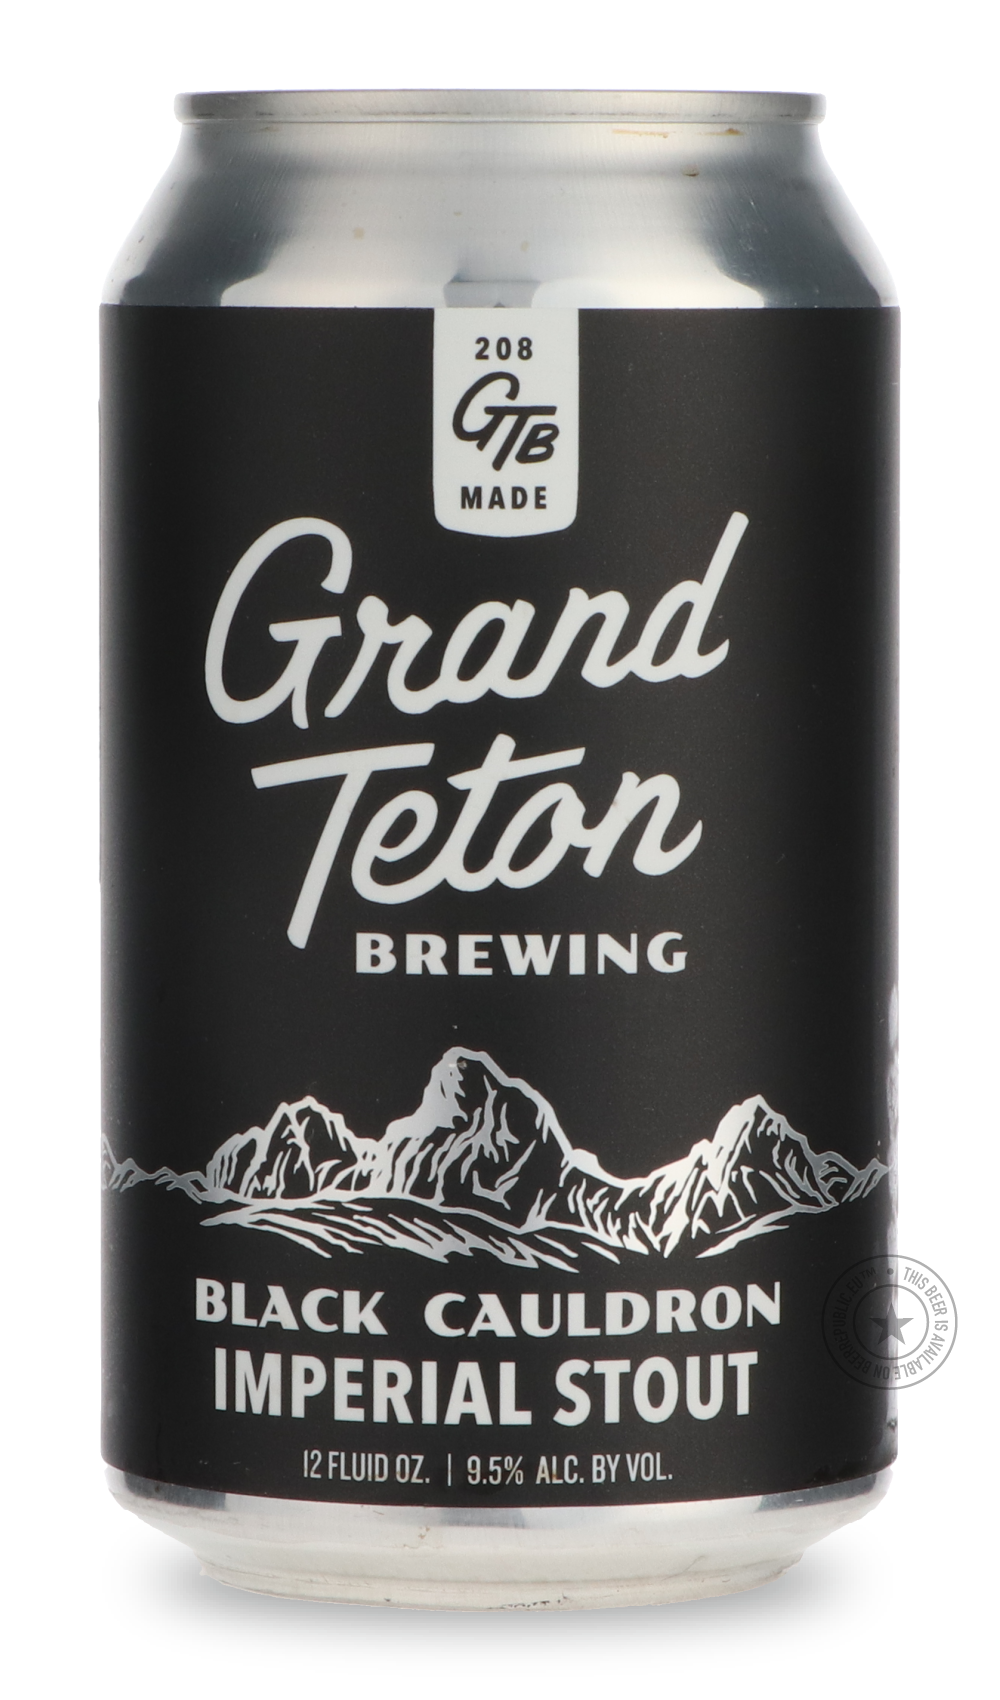 -Grand Teton- Black Cauldron-Stout & Porter- Only @ Beer Republic - The best online beer store for American & Canadian craft beer - Buy beer online from the USA and Canada - Bier online kopen - Amerikaans bier kopen - Craft beer store - Craft beer kopen - Amerikanisch bier kaufen - Bier online kaufen - Acheter biere online - IPA - Stout - Porter - New England IPA - Hazy IPA - Imperial Stout - Barrel Aged - Barrel Aged Imperial Stout - Brown - Dark beer - Blond - Blonde - Pilsner - Lager - Wheat - Weizen - A